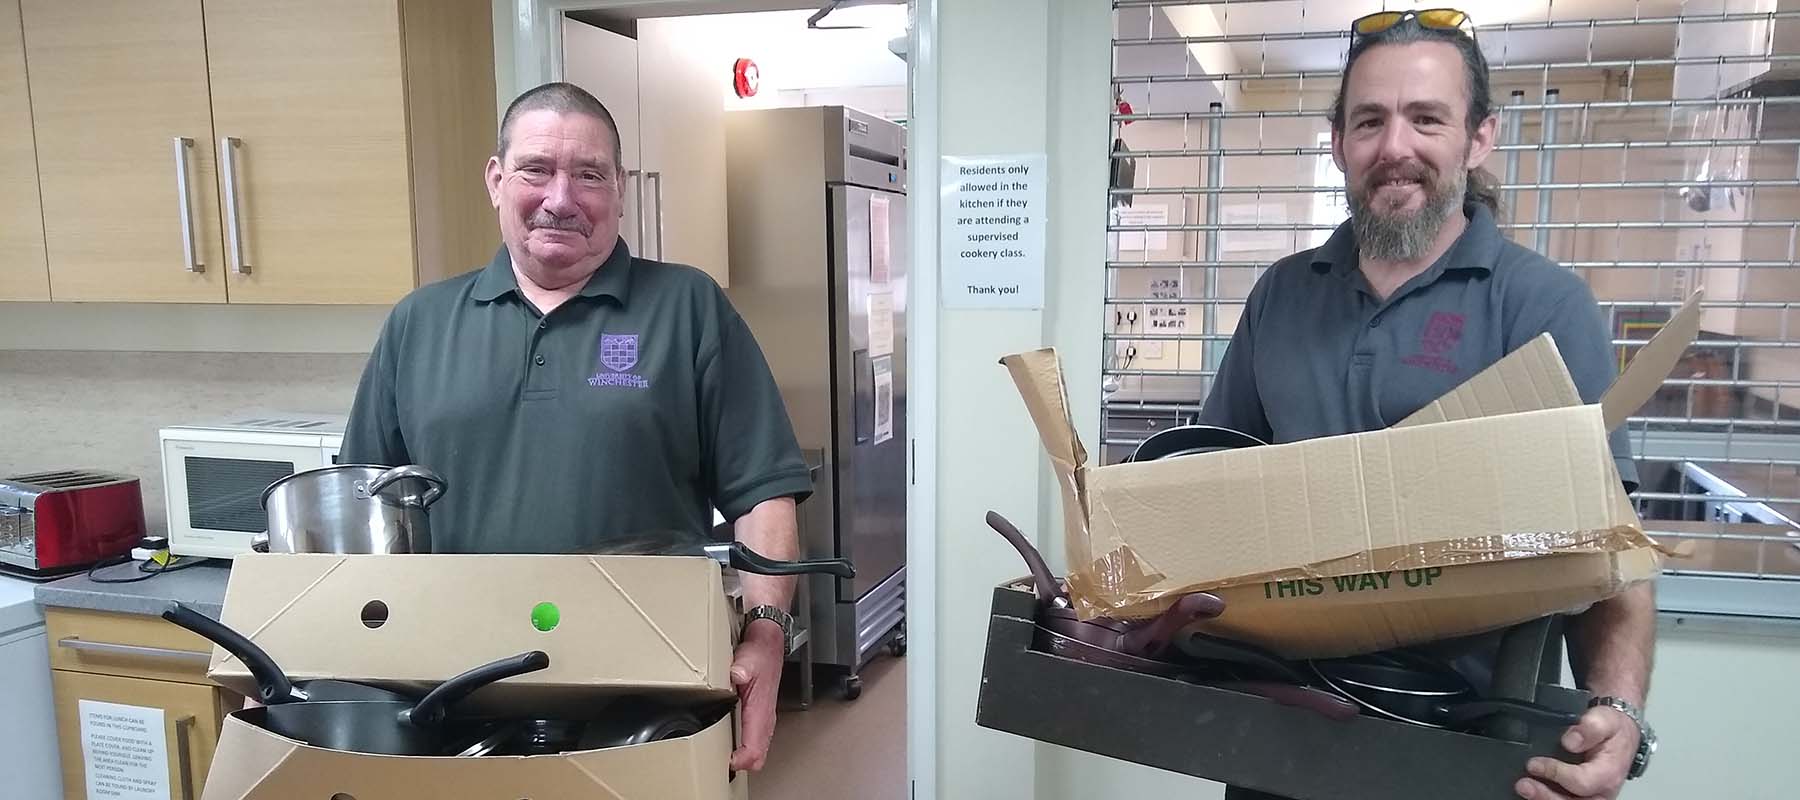 University porters with boxes of donated kitchen ware